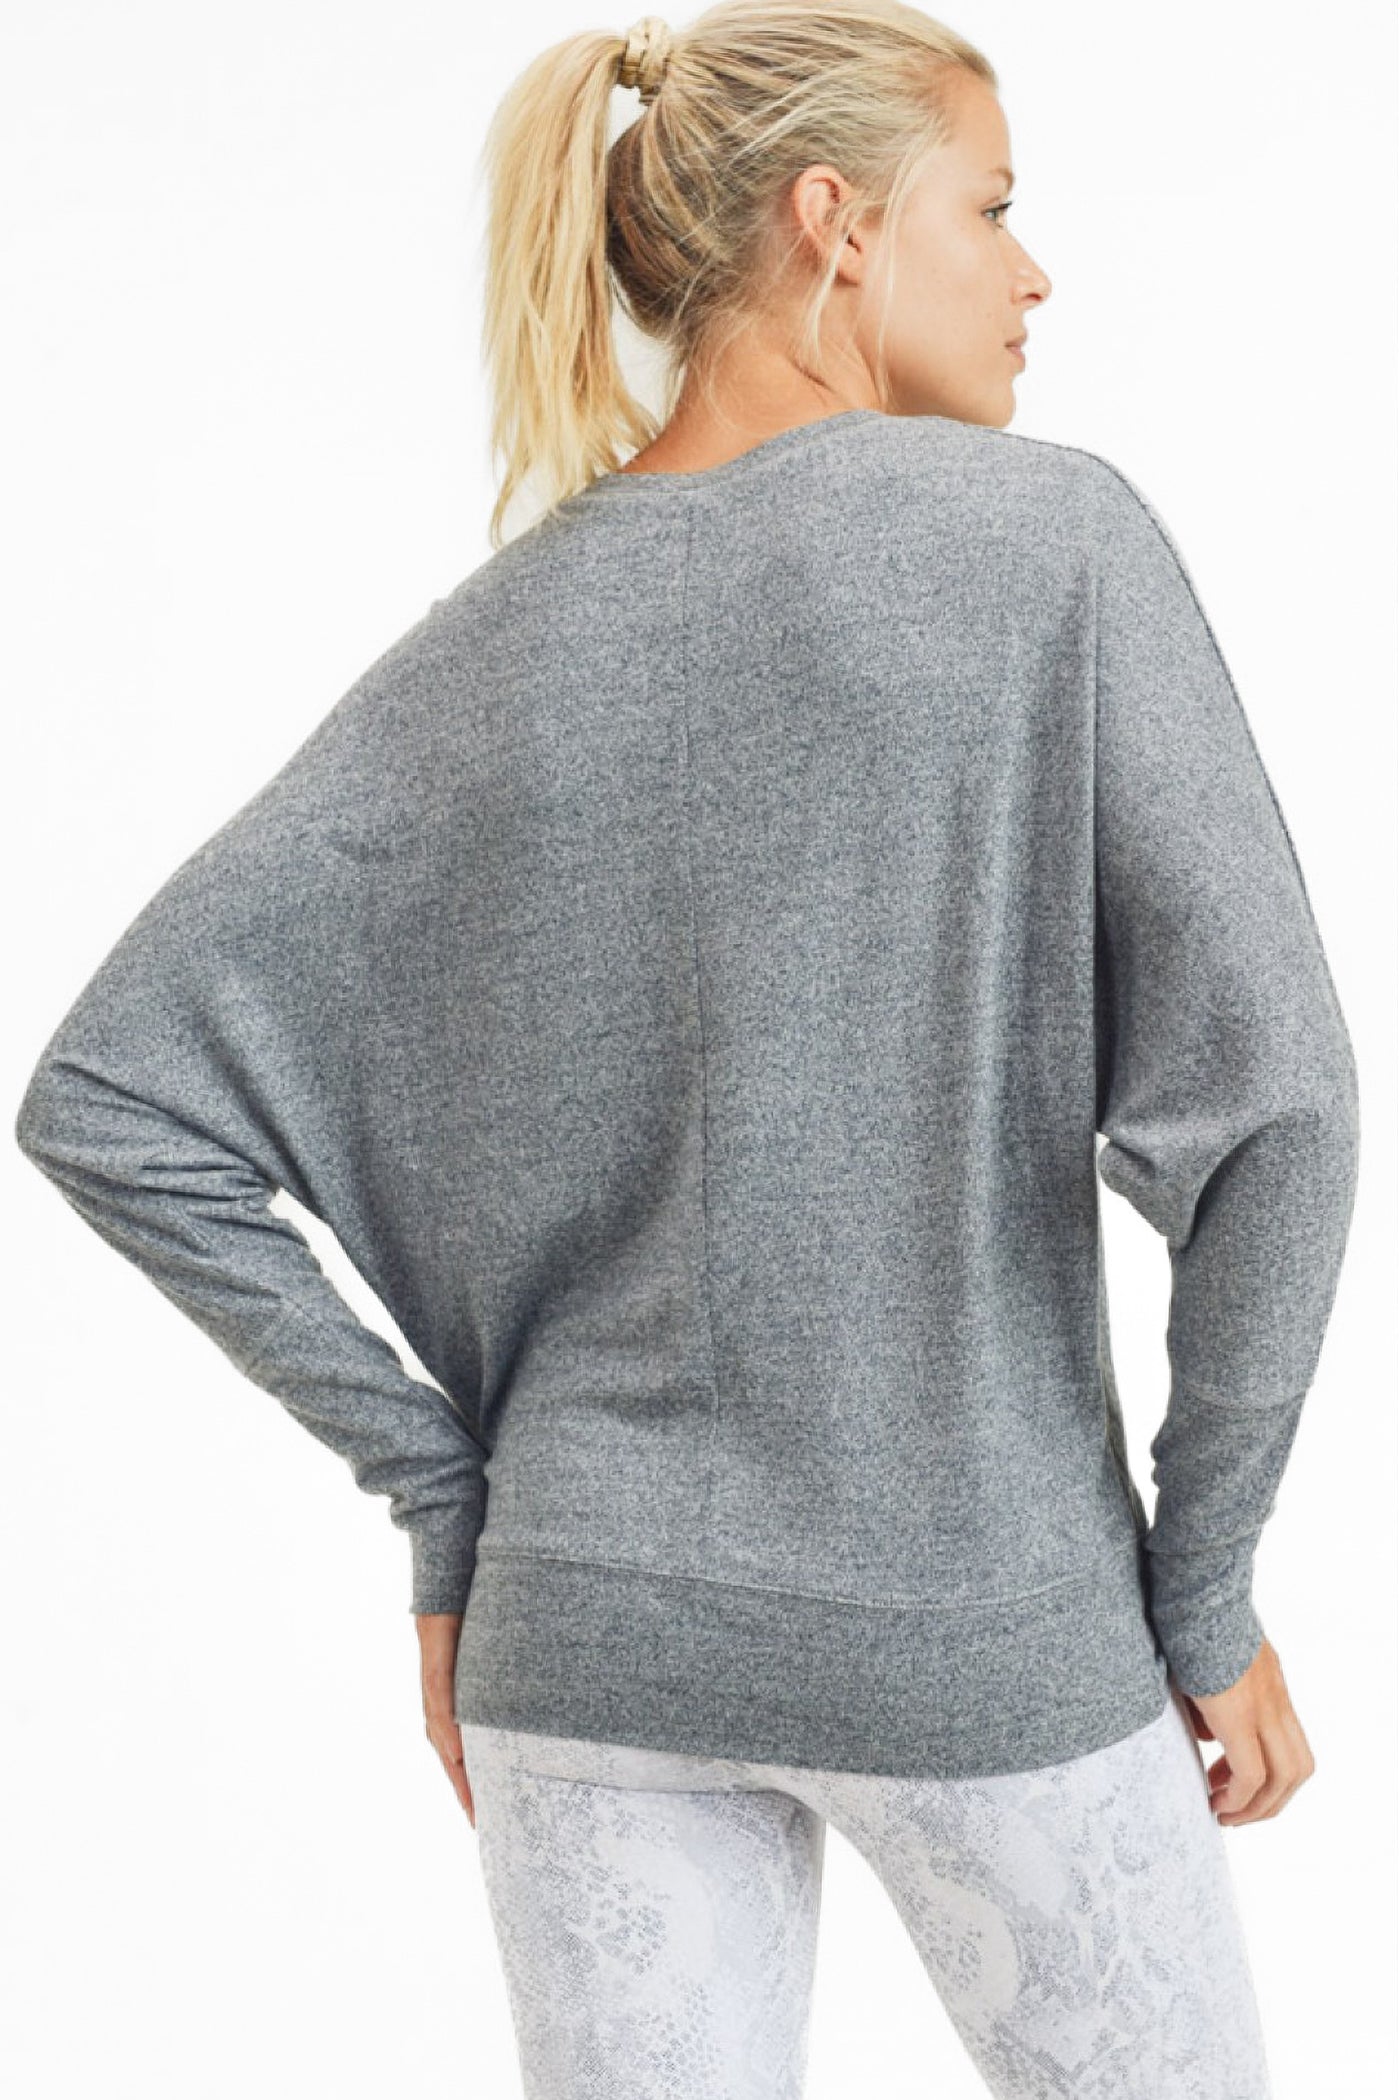 Two-Tone Soft Brushed Dolman